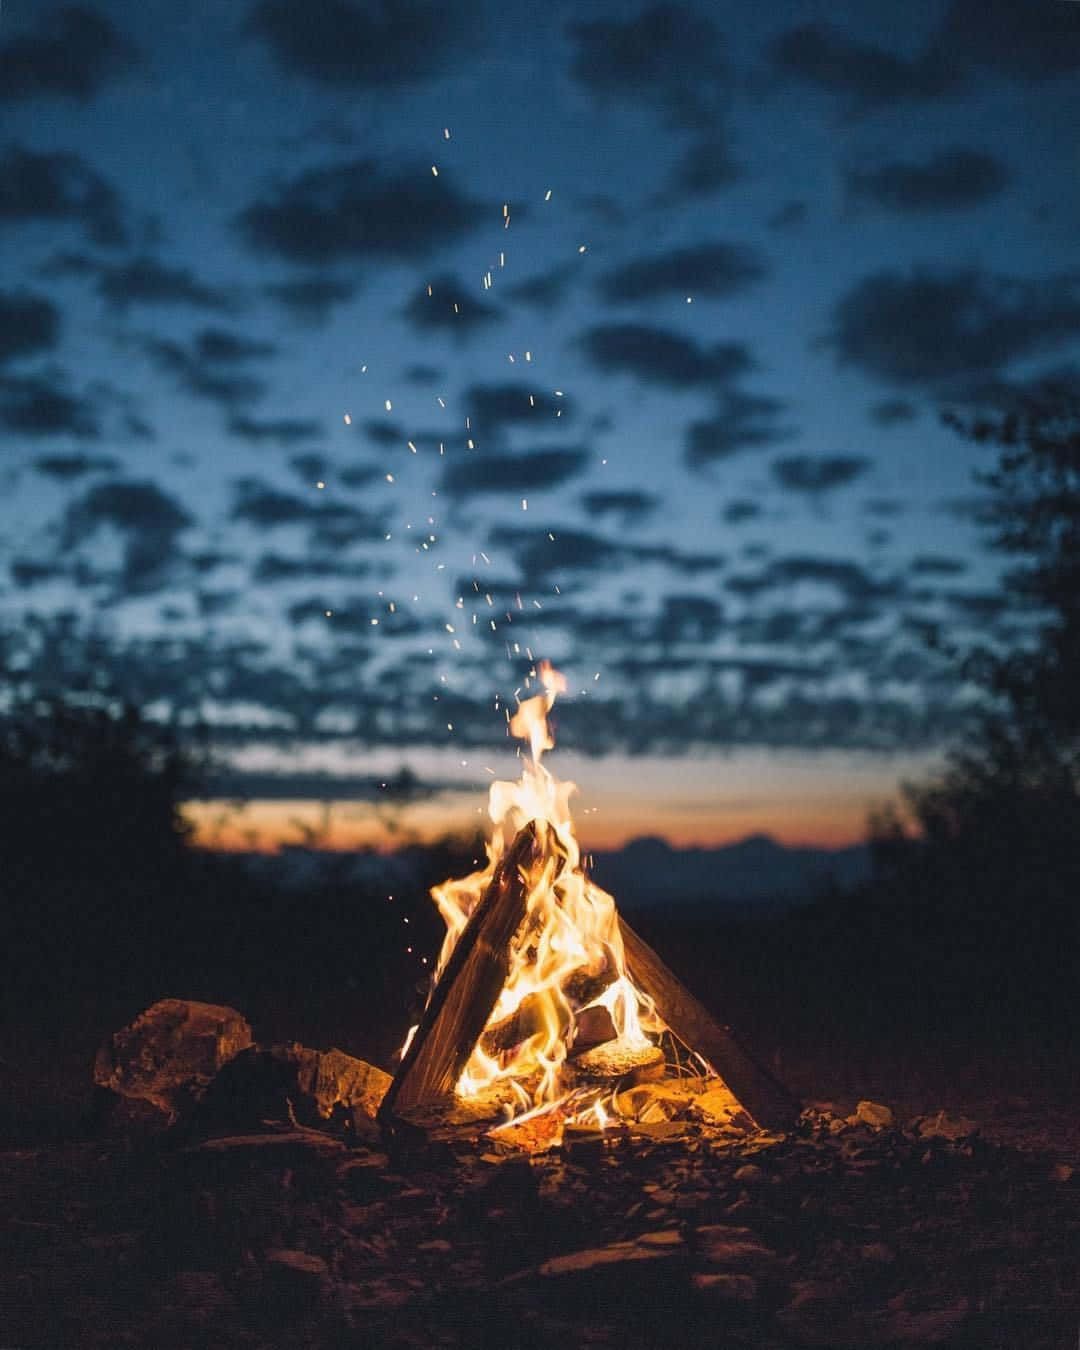 Campfire Aesthetic Image Wallpaper